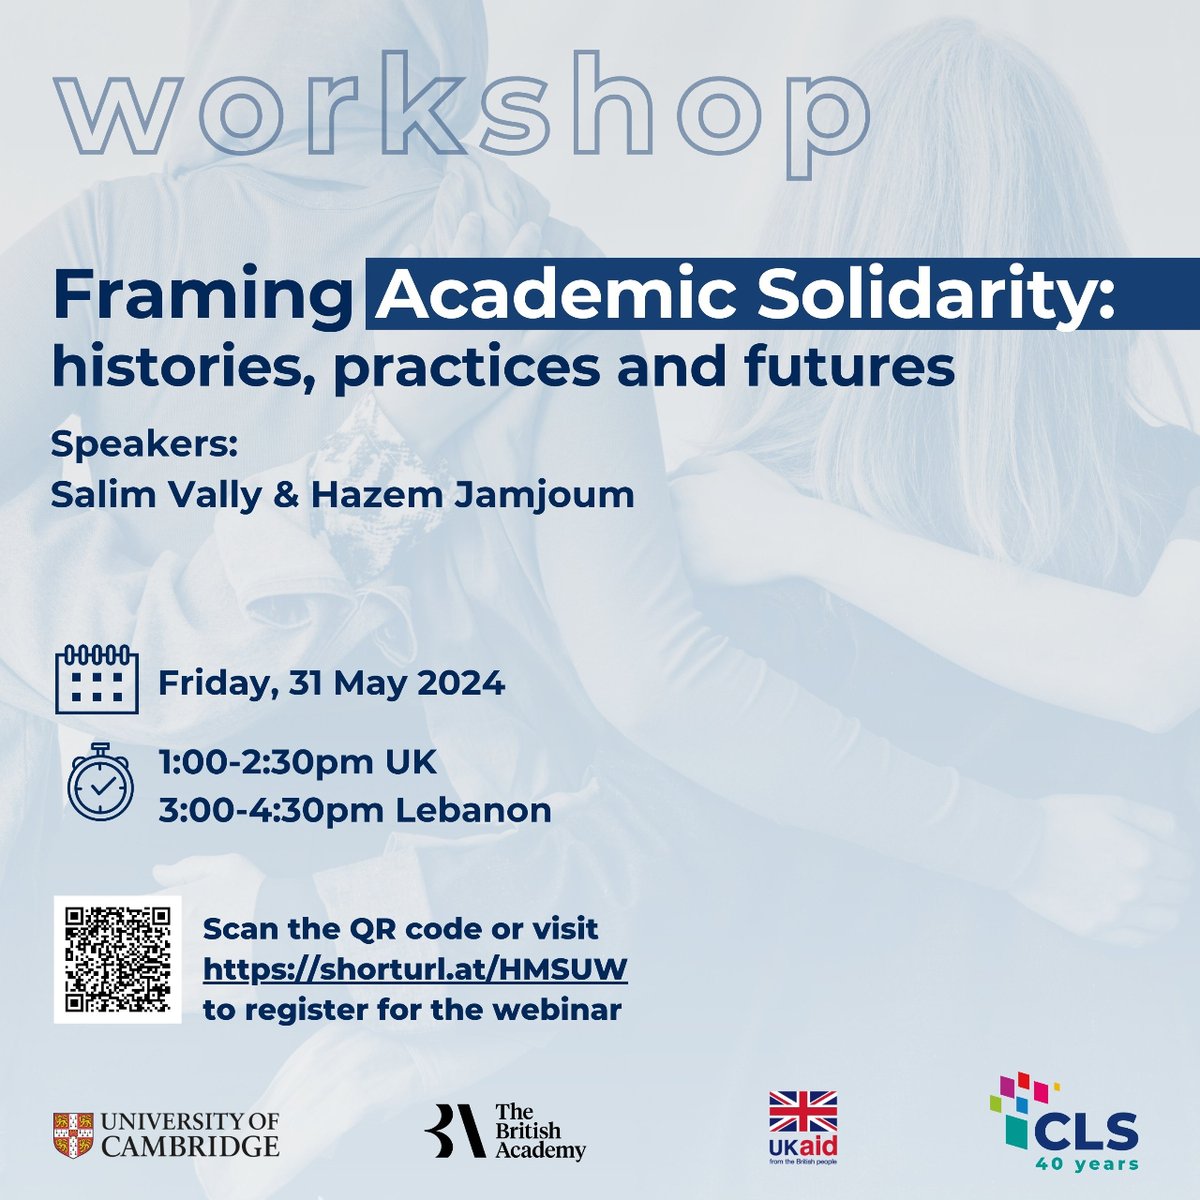 Join us for our 1st session, ‘Framing Academic Solidarity’! Salim Vally and Hazem Jamjoum discuss their personal and professional involvement in political struggles enacted in & through the university 31 May 1-3:30pm UK | 3-4:30pm Leb Register by 20 May: lebanesestudies.com/events/worksho…